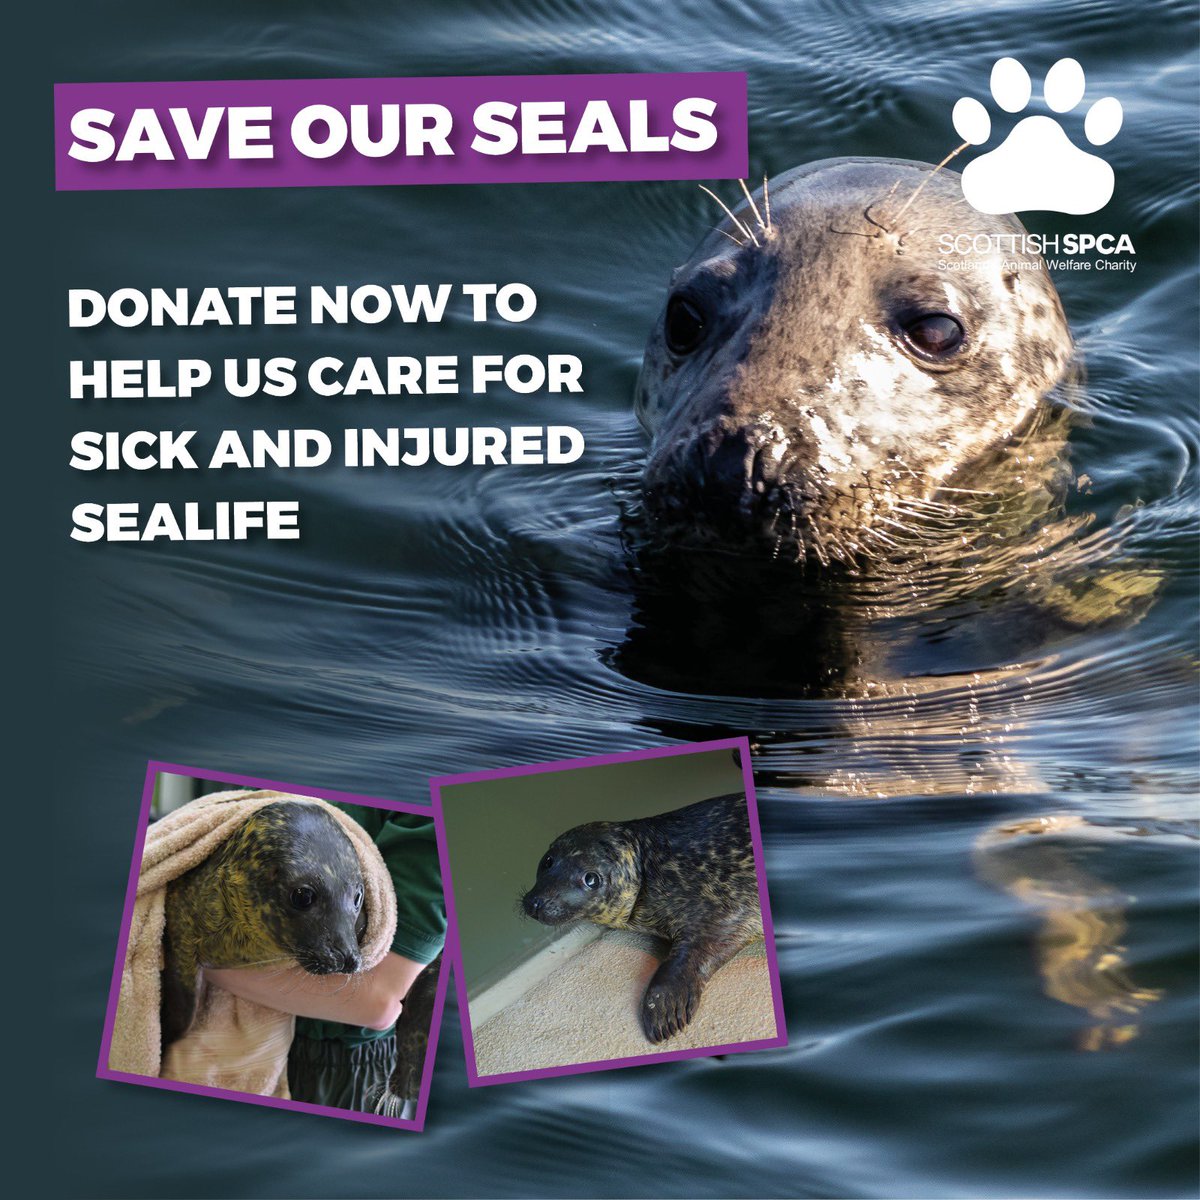 The @ScottishSPCA National Wildlife Rescue Centre is in urgent need of donations. Your donation can help the charity continue their work with wildlife, find out more and donate here: scottishspca.org/saveourseals